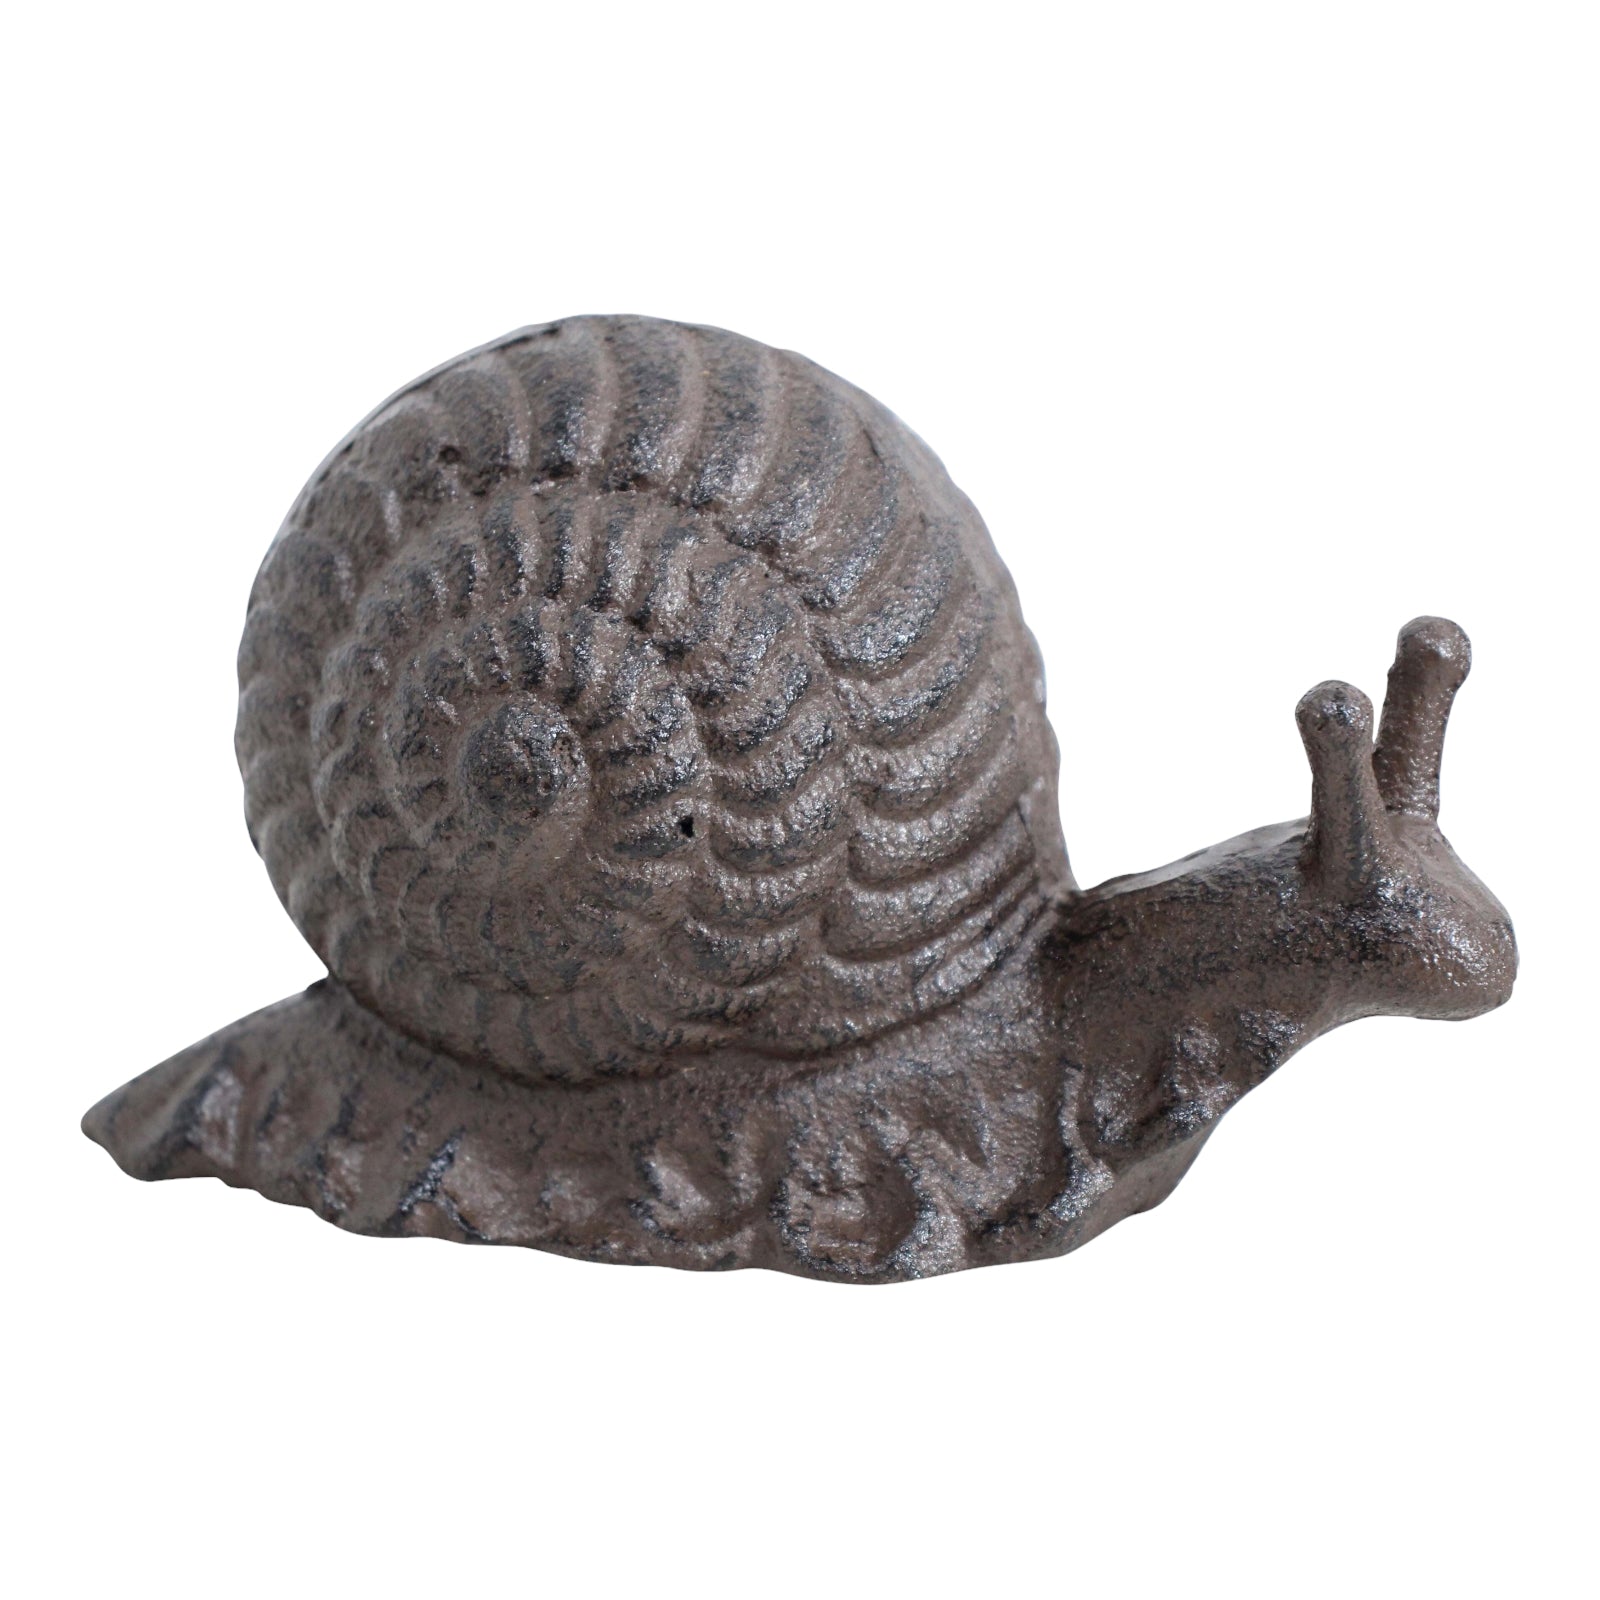 Snail Cast Iron Ornament - The Renmy Store Homewares & Gifts 